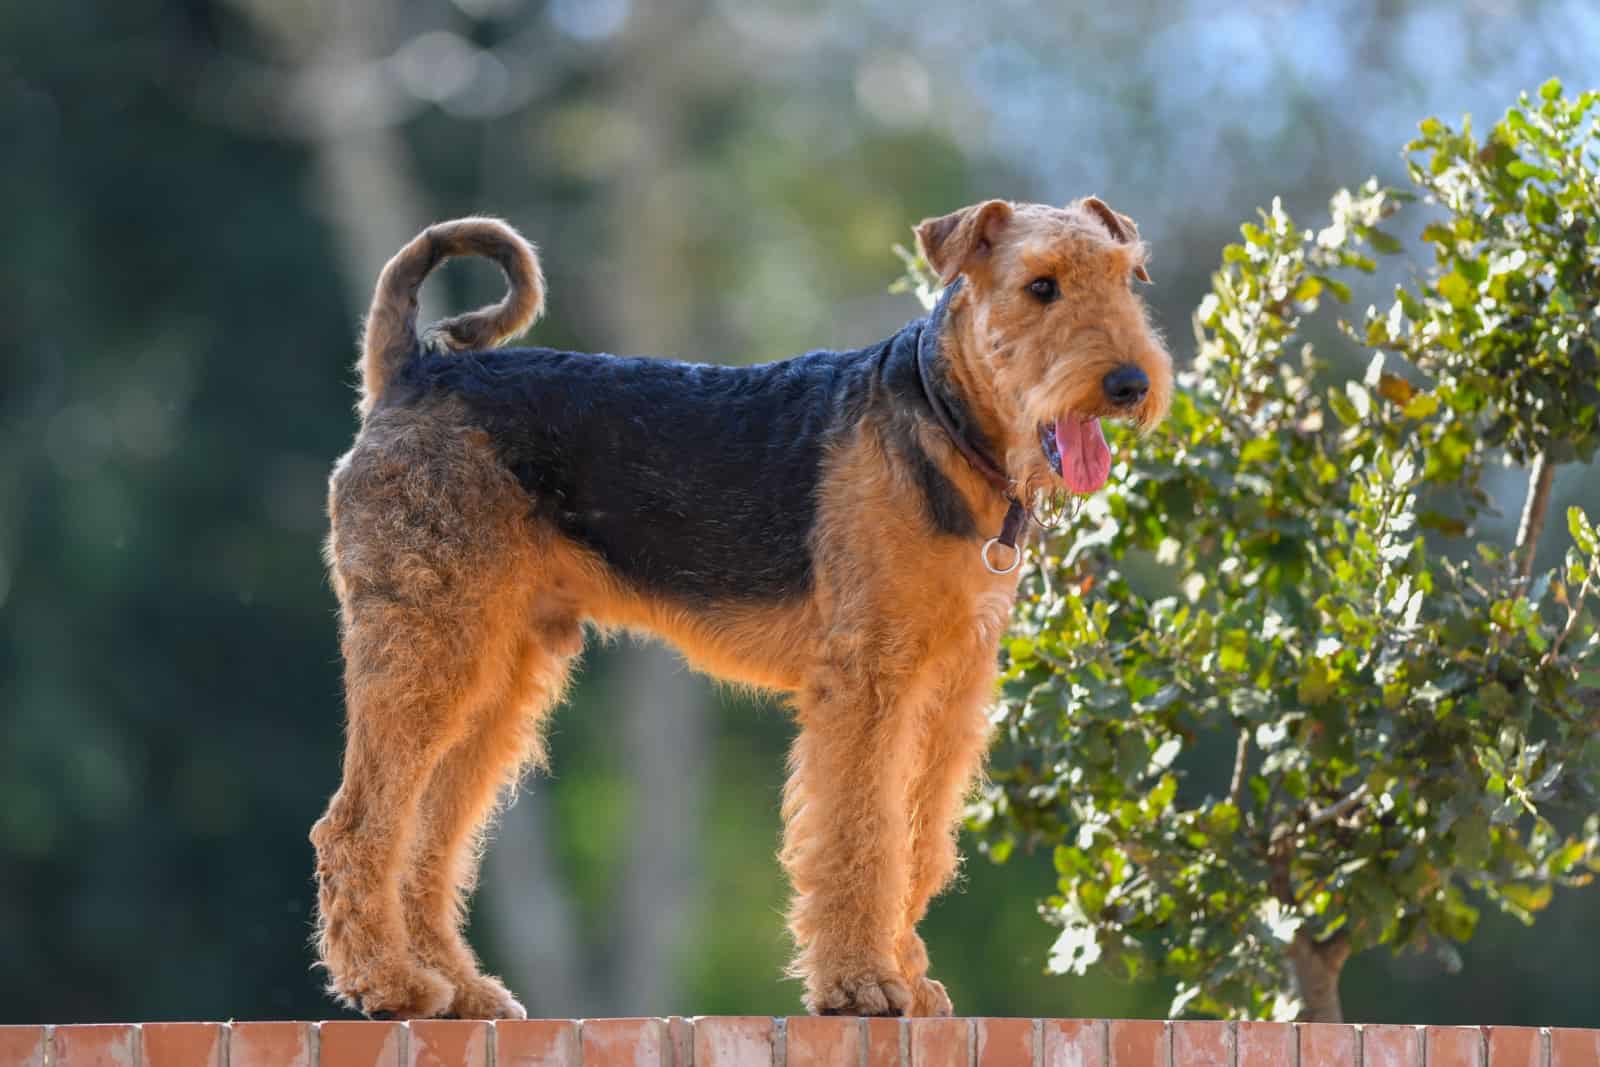 A two-year-old Airedale Terrier dog.